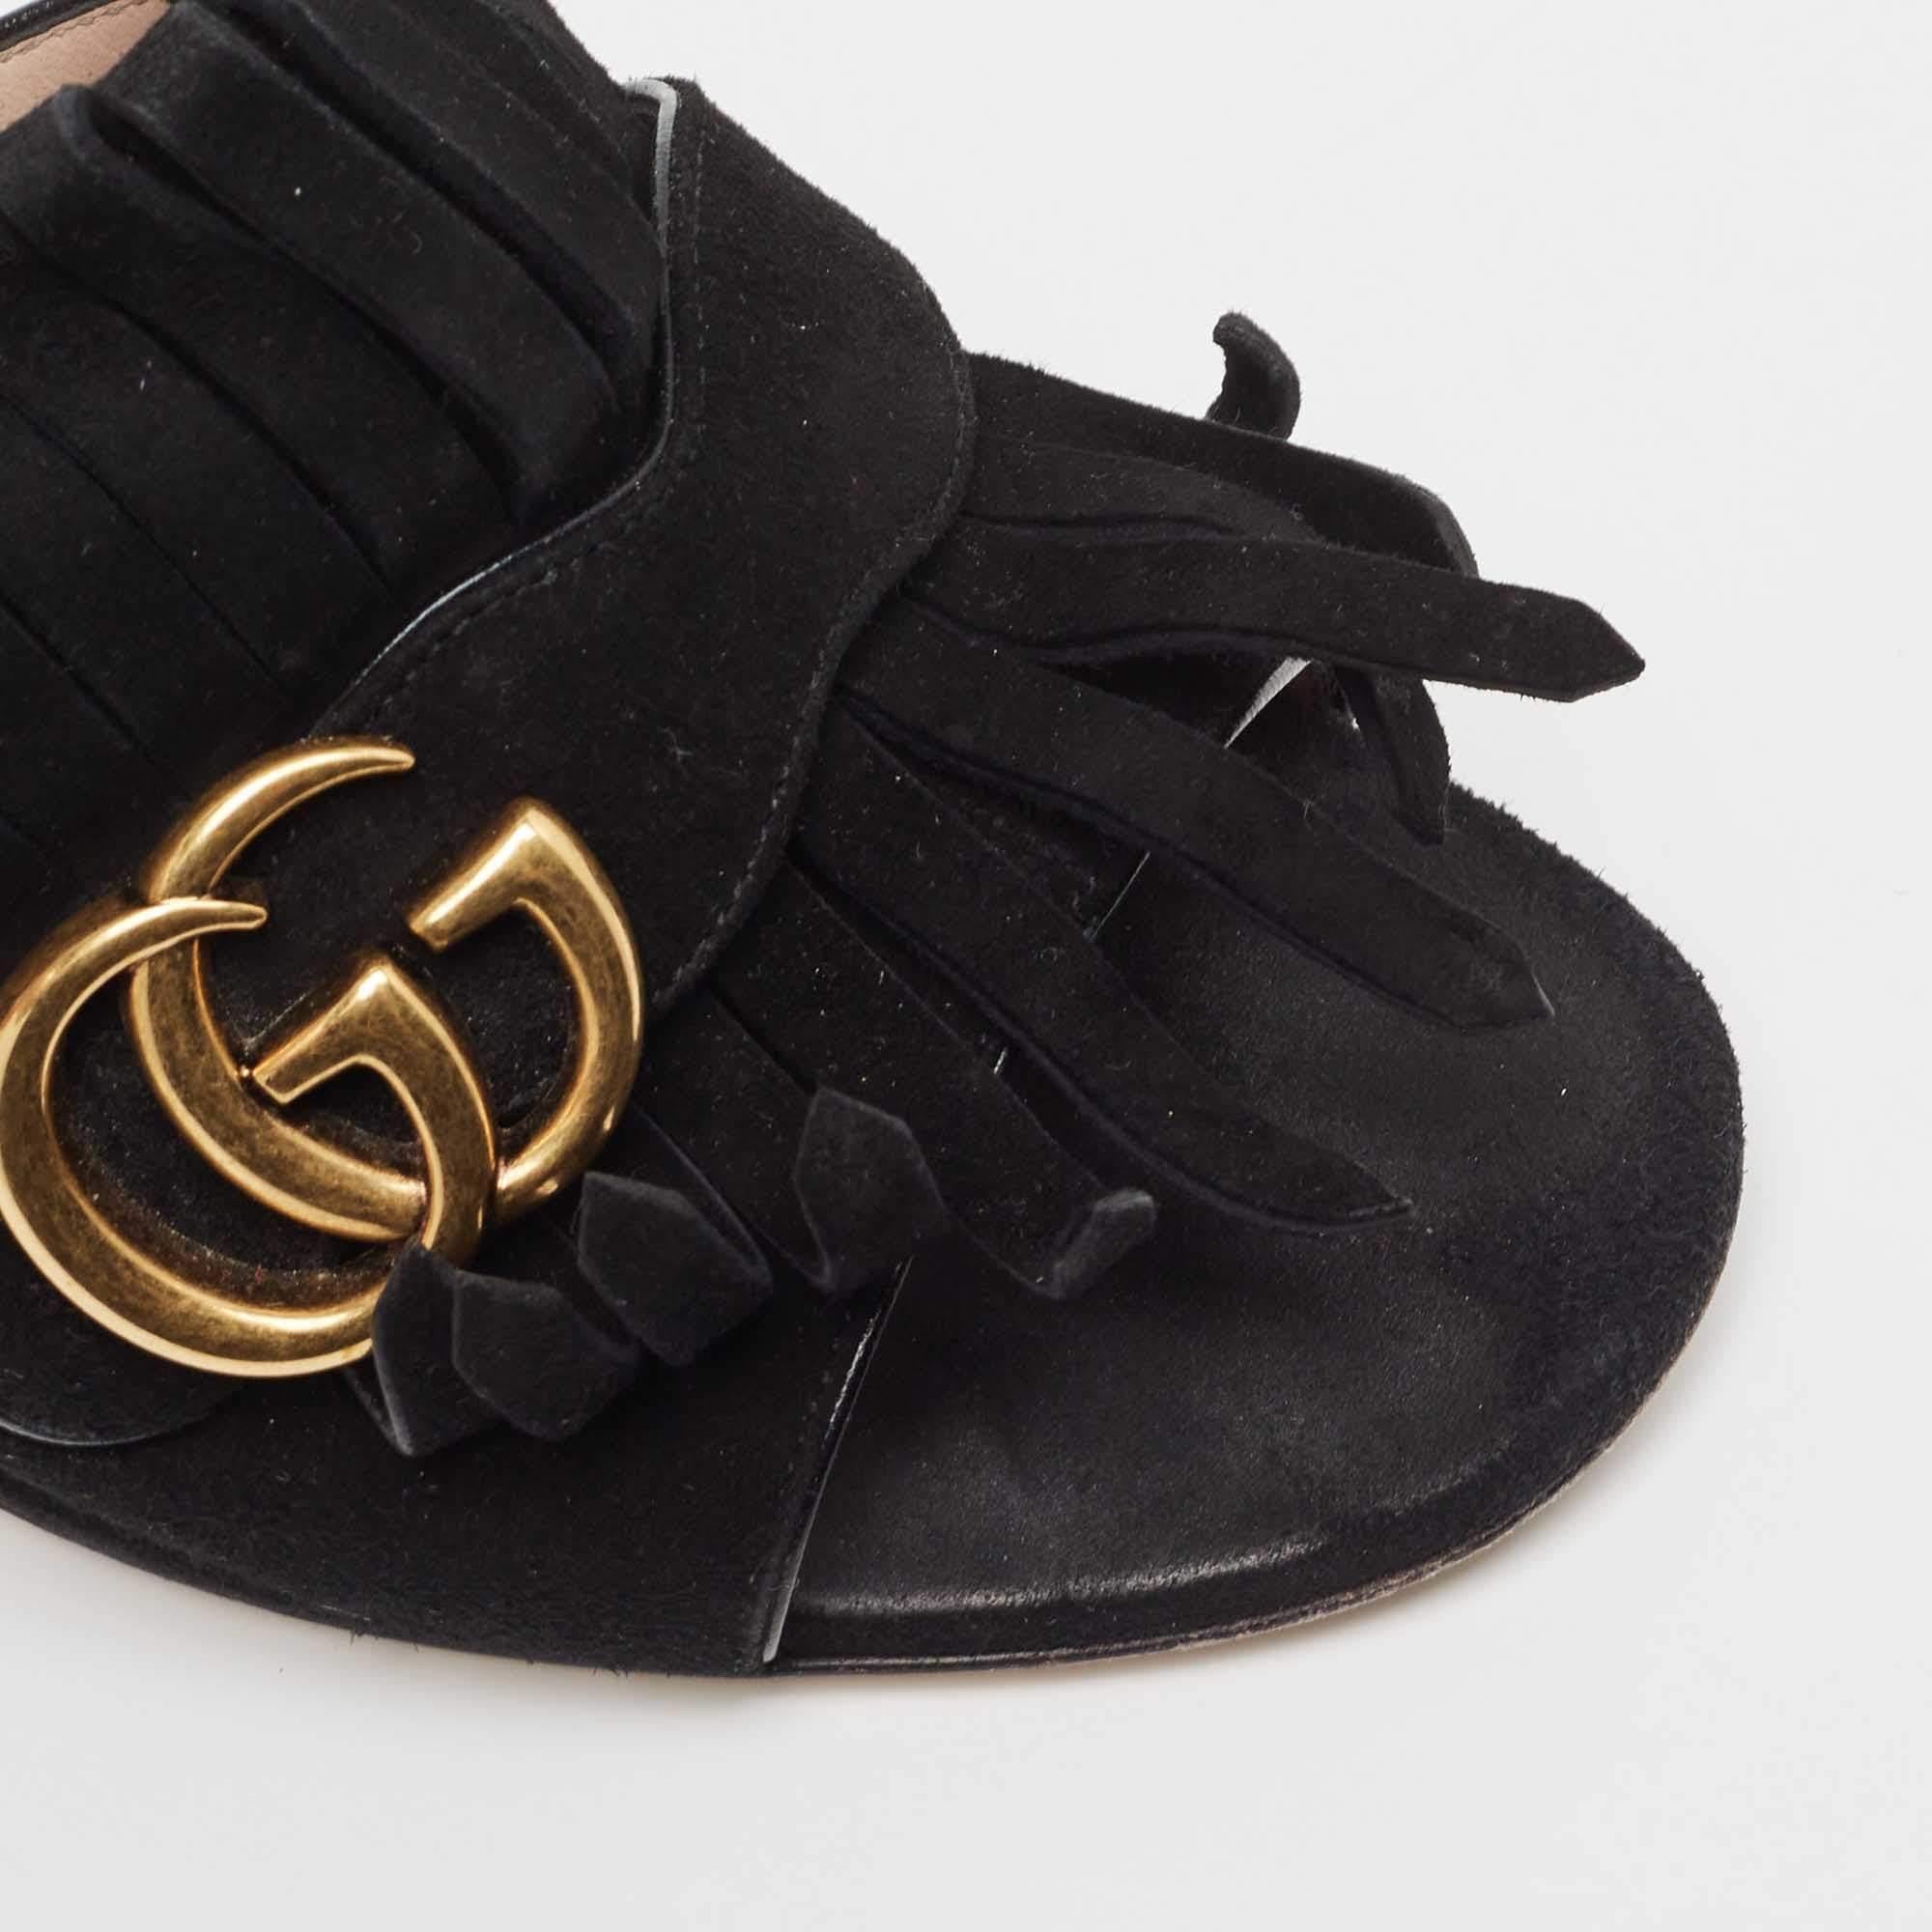 Gucci Black Suede GG Marmont Fringe Mules Size 37 1